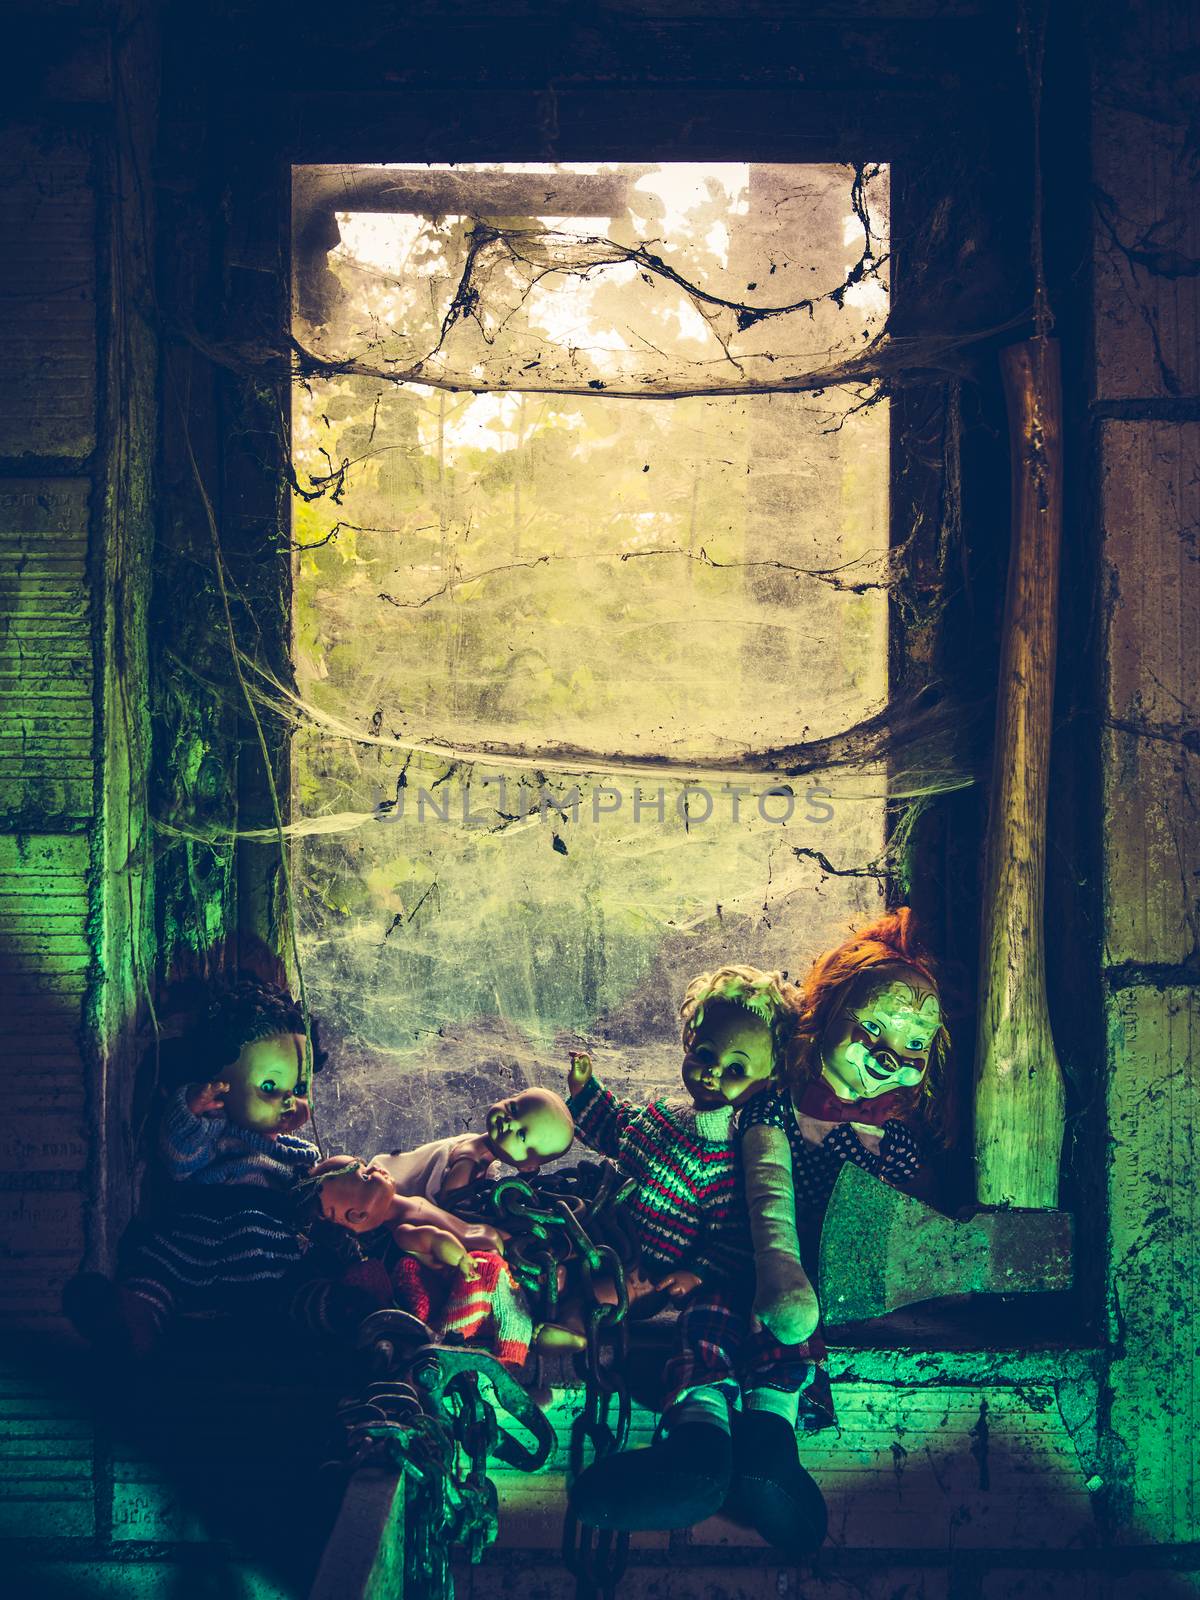 Creepy dolls by the window by sumners